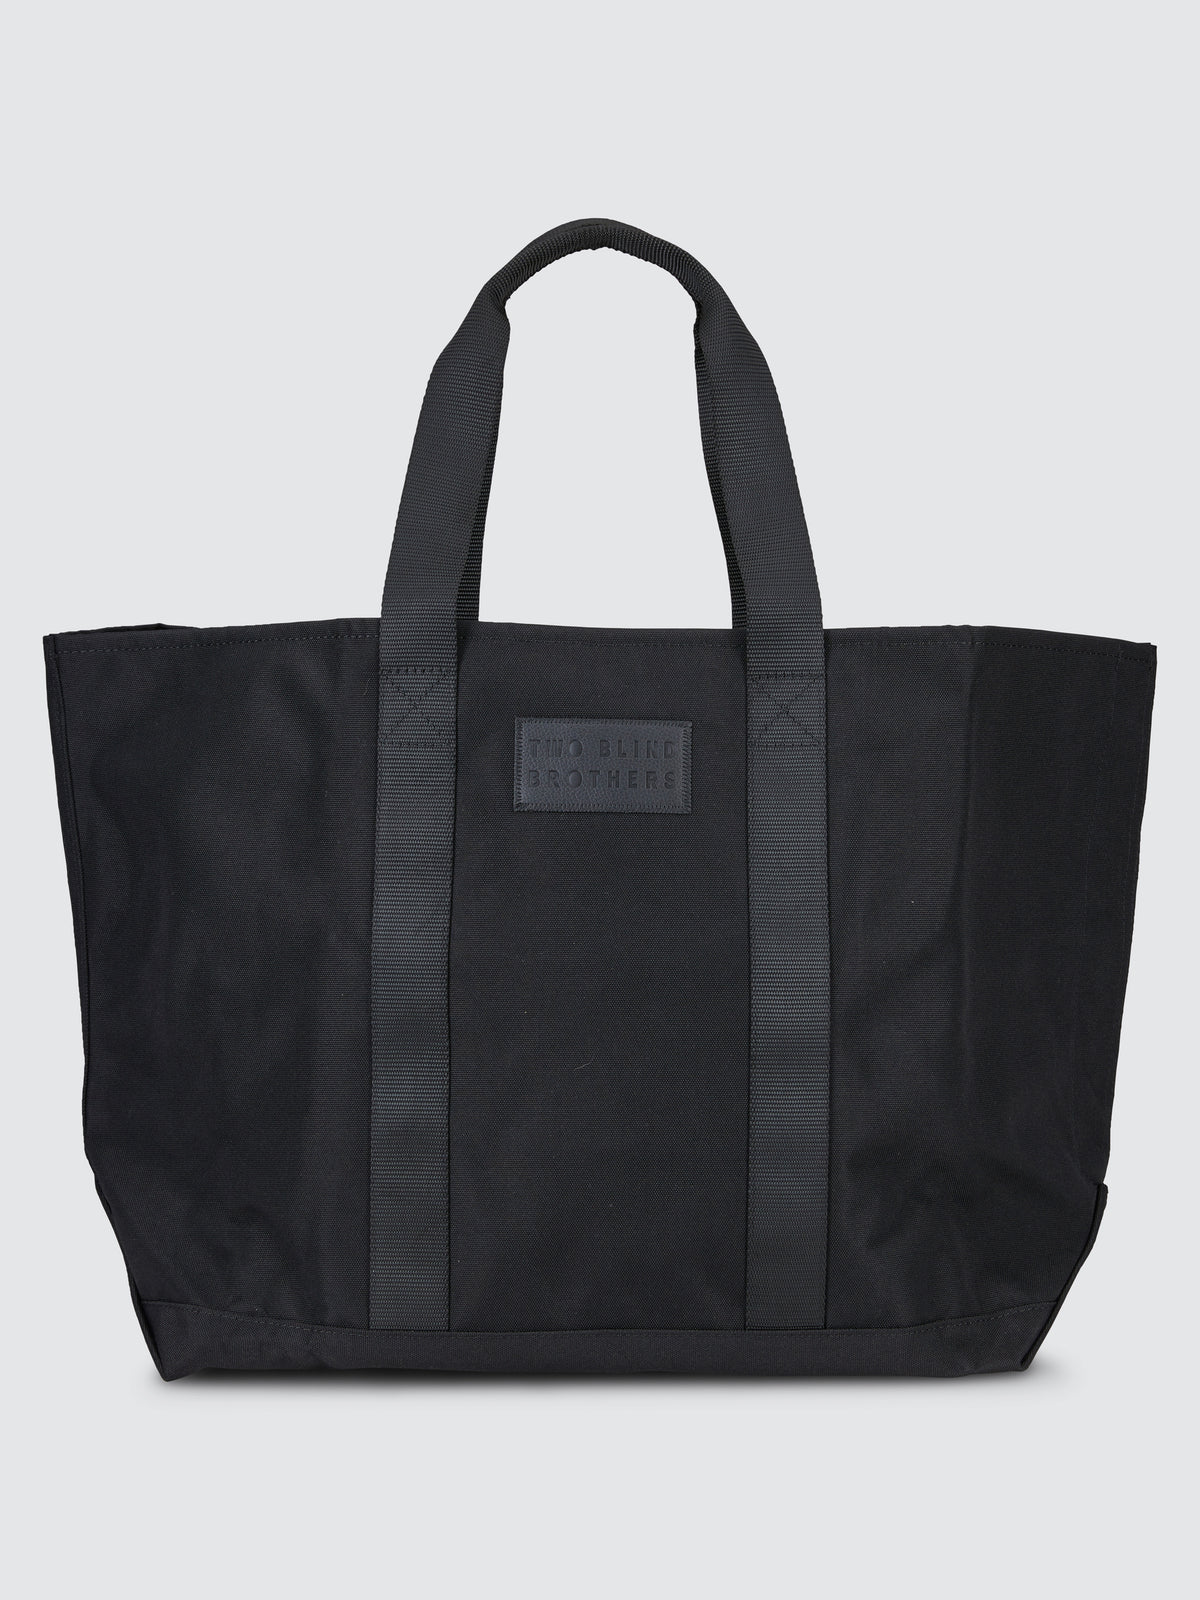 Two Blind Brothers - Gift 2BB Black Tote Bag all